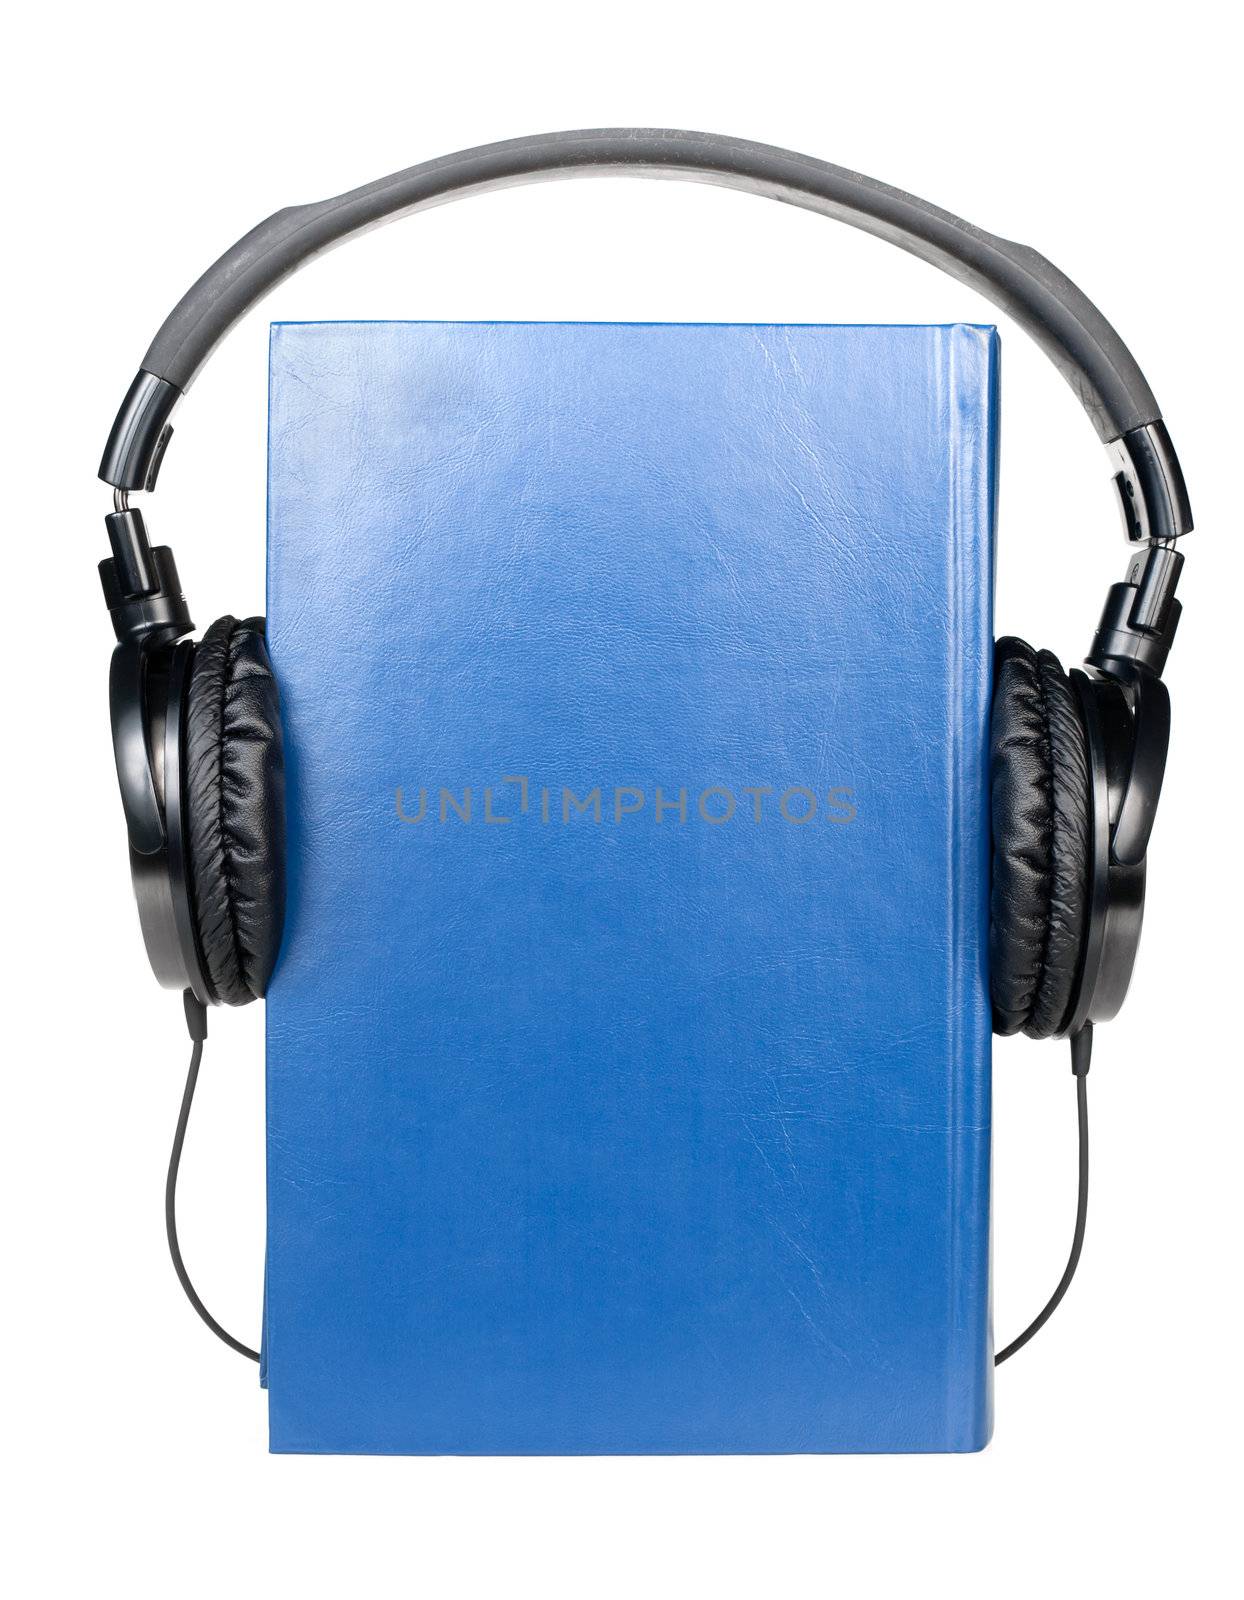 Book with headphones by naumoid